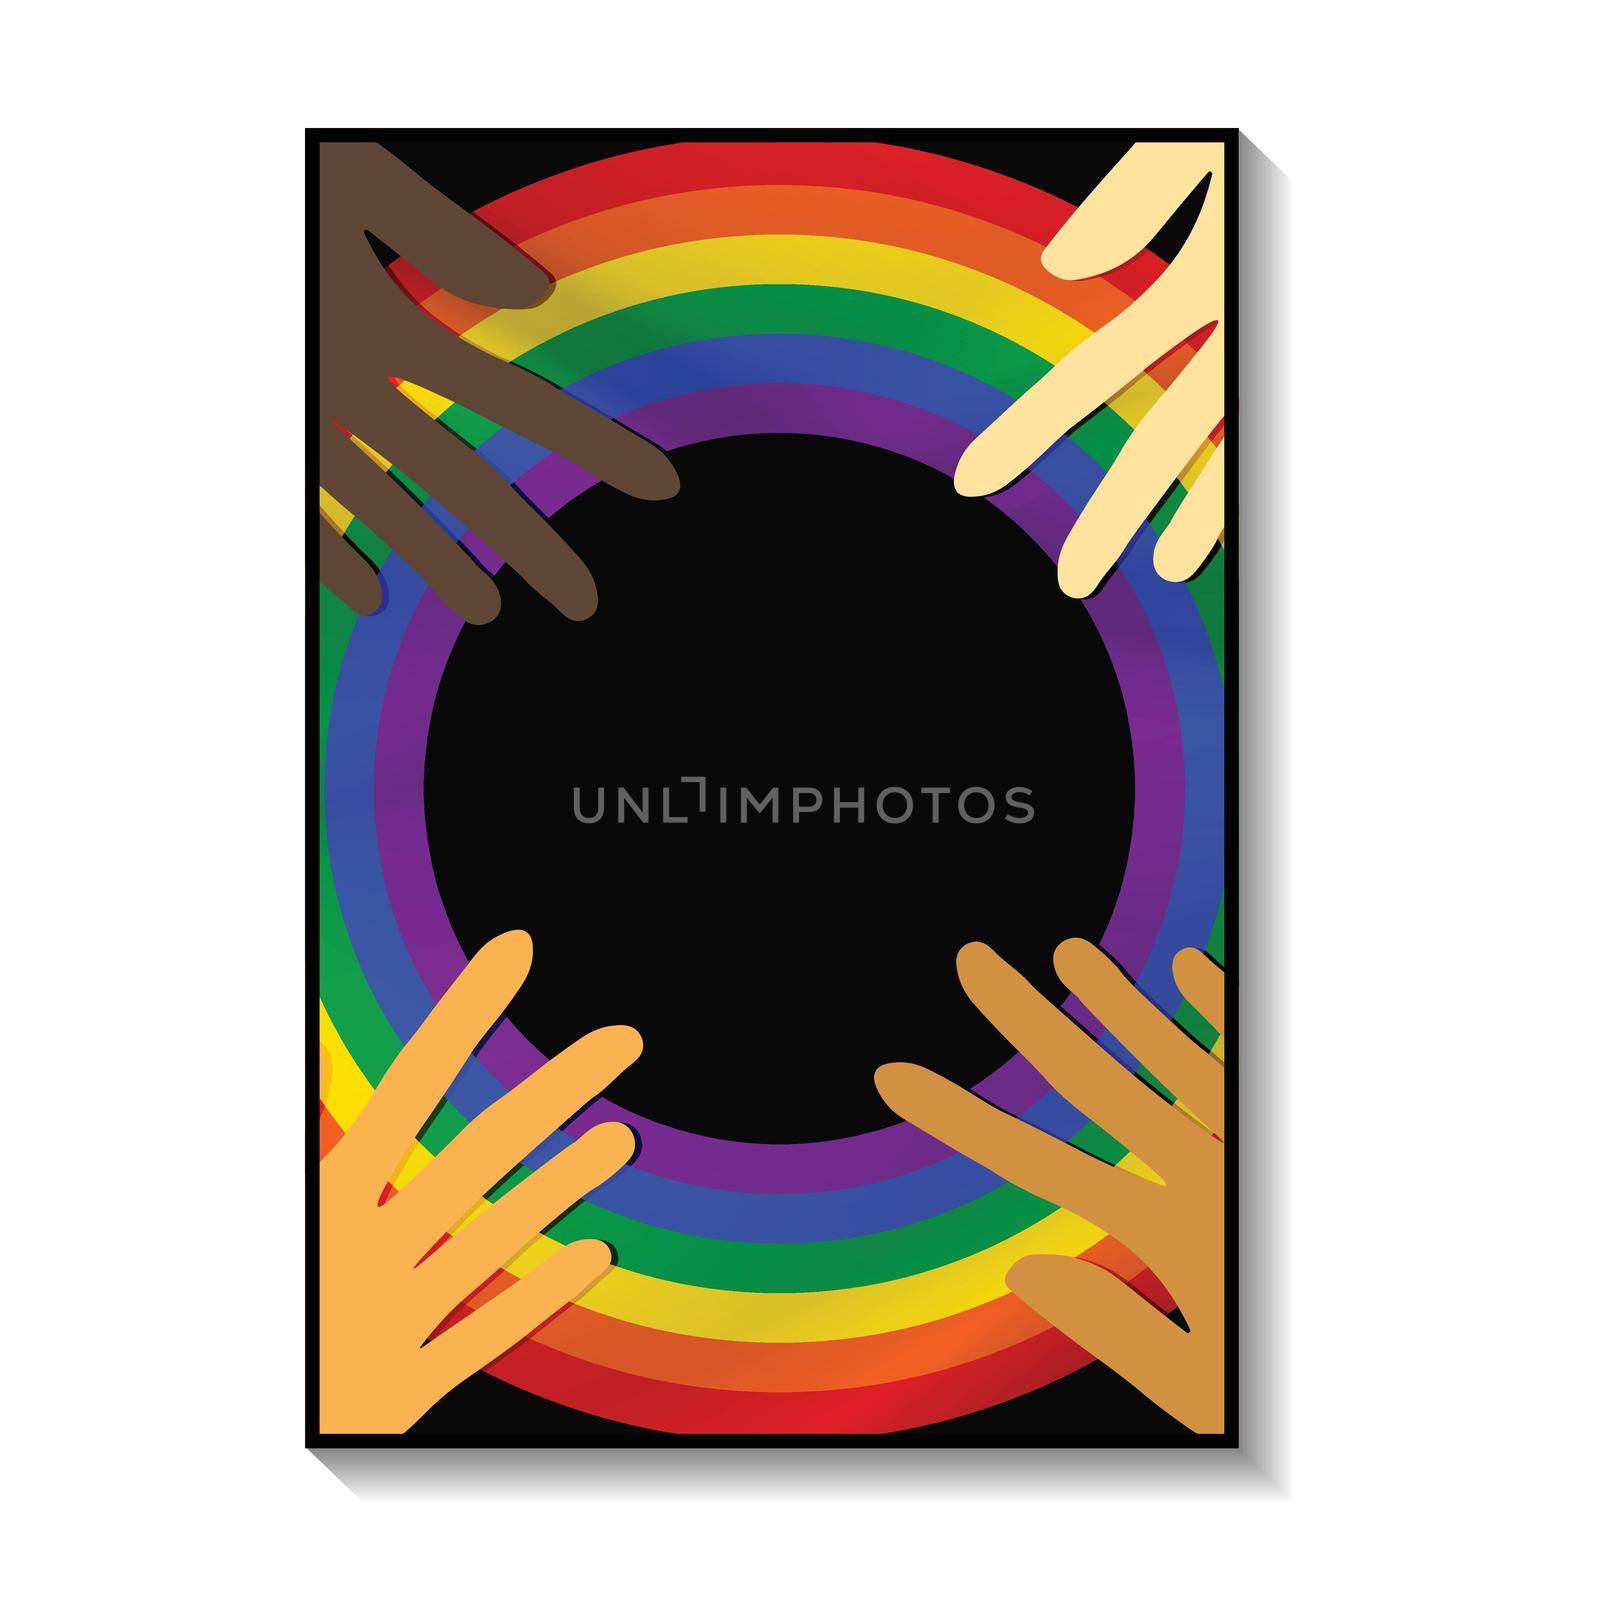 Gay pride month poster collection, banner. Lettering LGBT, hearts, colorful symbols, LGBT icons. Template design, vector illustration. Love wins. Geometric shapes in the colors on the rainbow by allaku